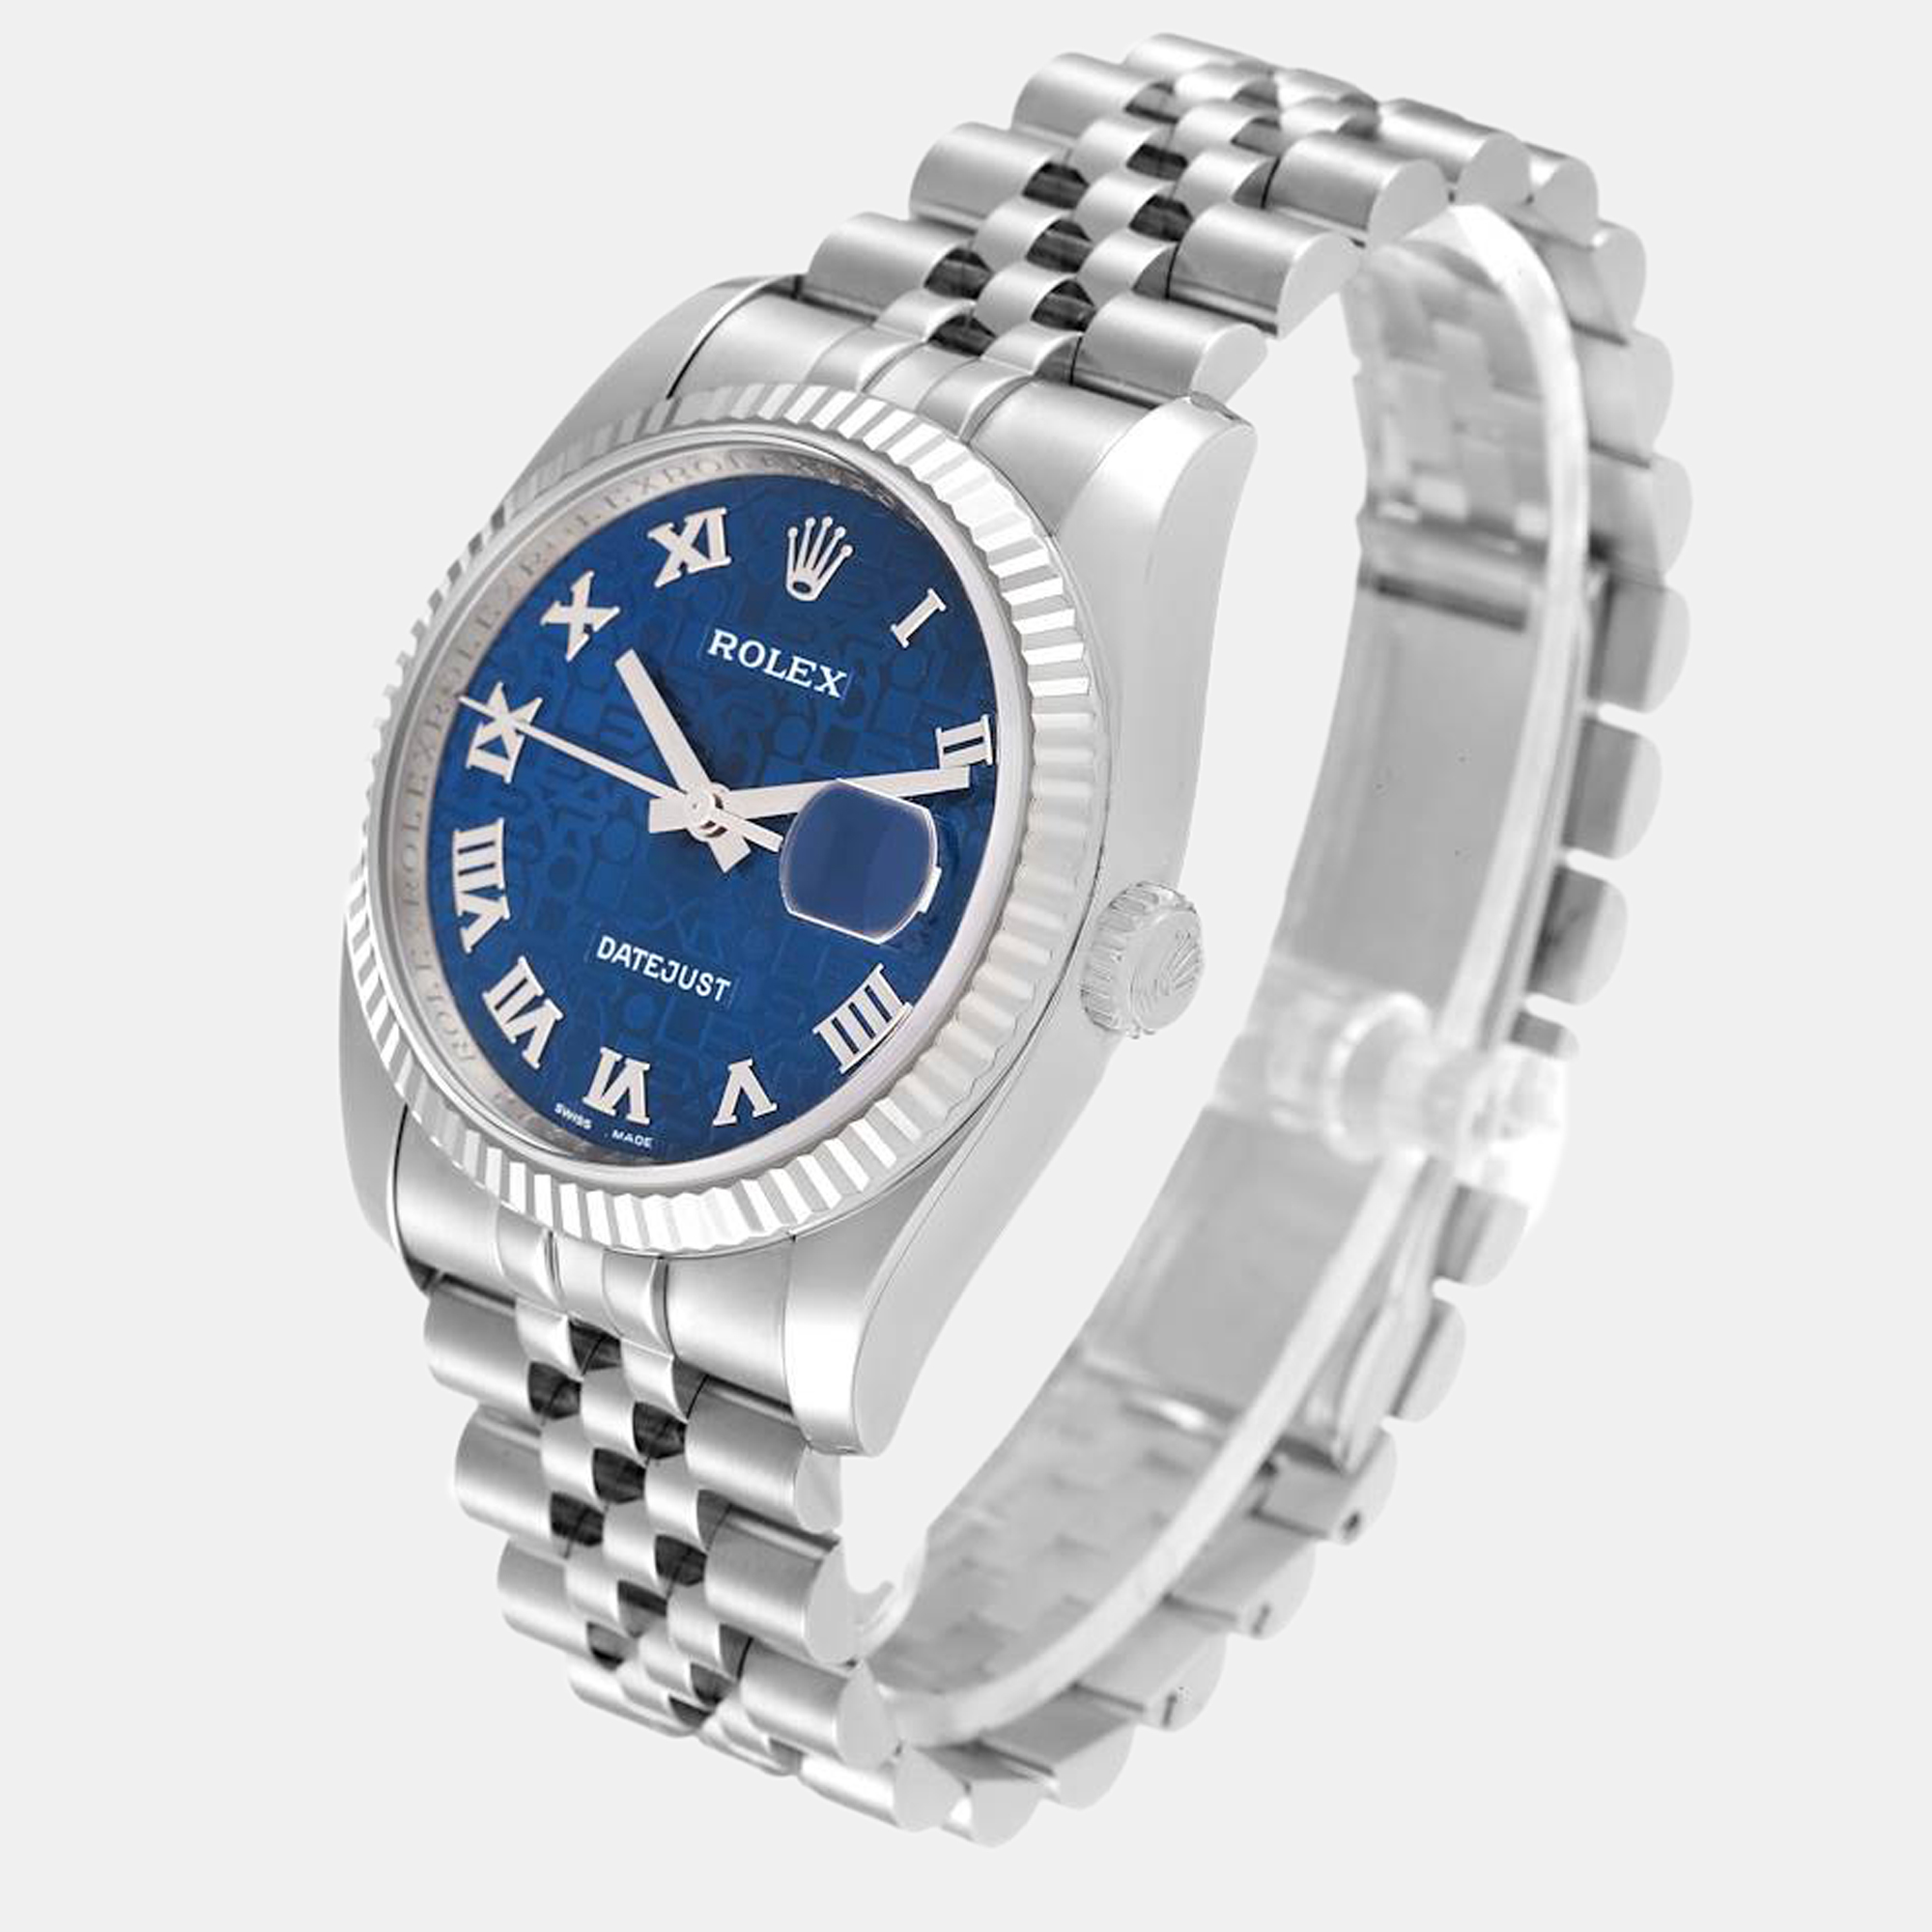 Rolex Blue 18k White Gold And Stainless Steel Datejust 116234 Automatic Men's Wristwatch 36 Mm